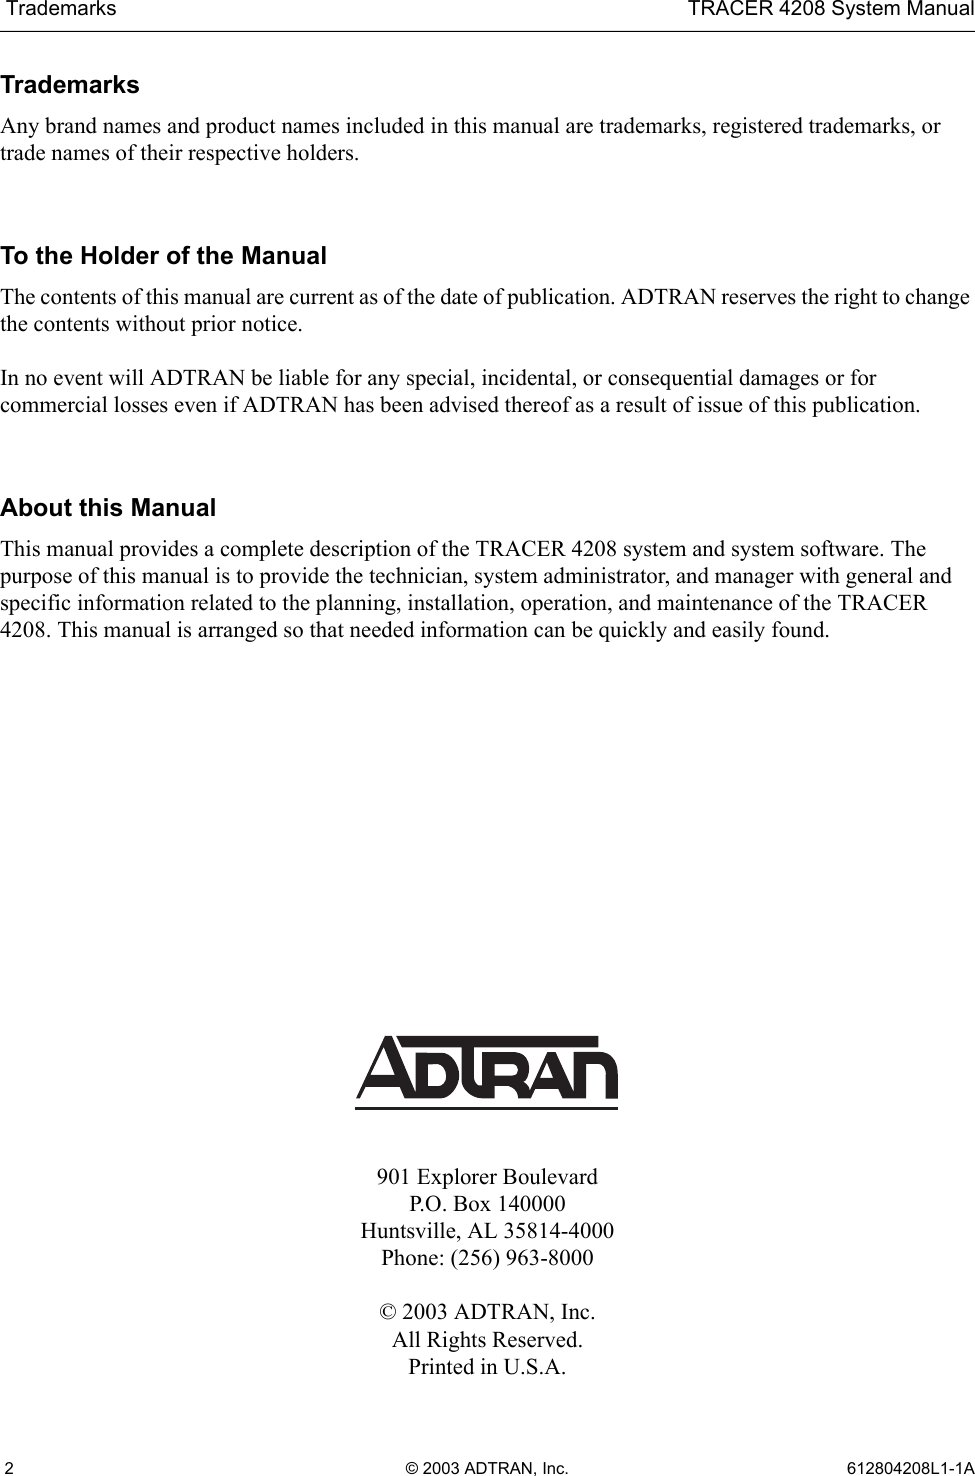  Trademarks  TRACER 4208 System ManualTrademarks Any brand names and product names included in this manual are trademarks, registered trademarks, or trade names of their respective holders. To the Holder of the Manual The contents of this manual are current as of the date of publication. ADTRAN reserves the right to change the contents without prior notice. In no event will ADTRAN be liable for any special, incidental, or consequential damages or for commercial losses even if ADTRAN has been advised thereof as a result of issue of this publication. About this Manual This manual provides a complete description of the TRACER 4208 system and system software. The purpose of this manual is to provide the technician, system administrator, and manager with general and specific information related to the planning, installation, operation, and maintenance of the TRACER 4208. This manual is arranged so that needed information can be quickly and easily found. 901 Explorer Boulevard P.O. Box 140000 Huntsville, AL 35814-4000 Phone: (256) 963-8000 © 2003 ADTRAN, Inc. All Rights Reserved. Printed in U.S.A. © 2003 ADTRAN, Inc.  612804208L1-1A  2 